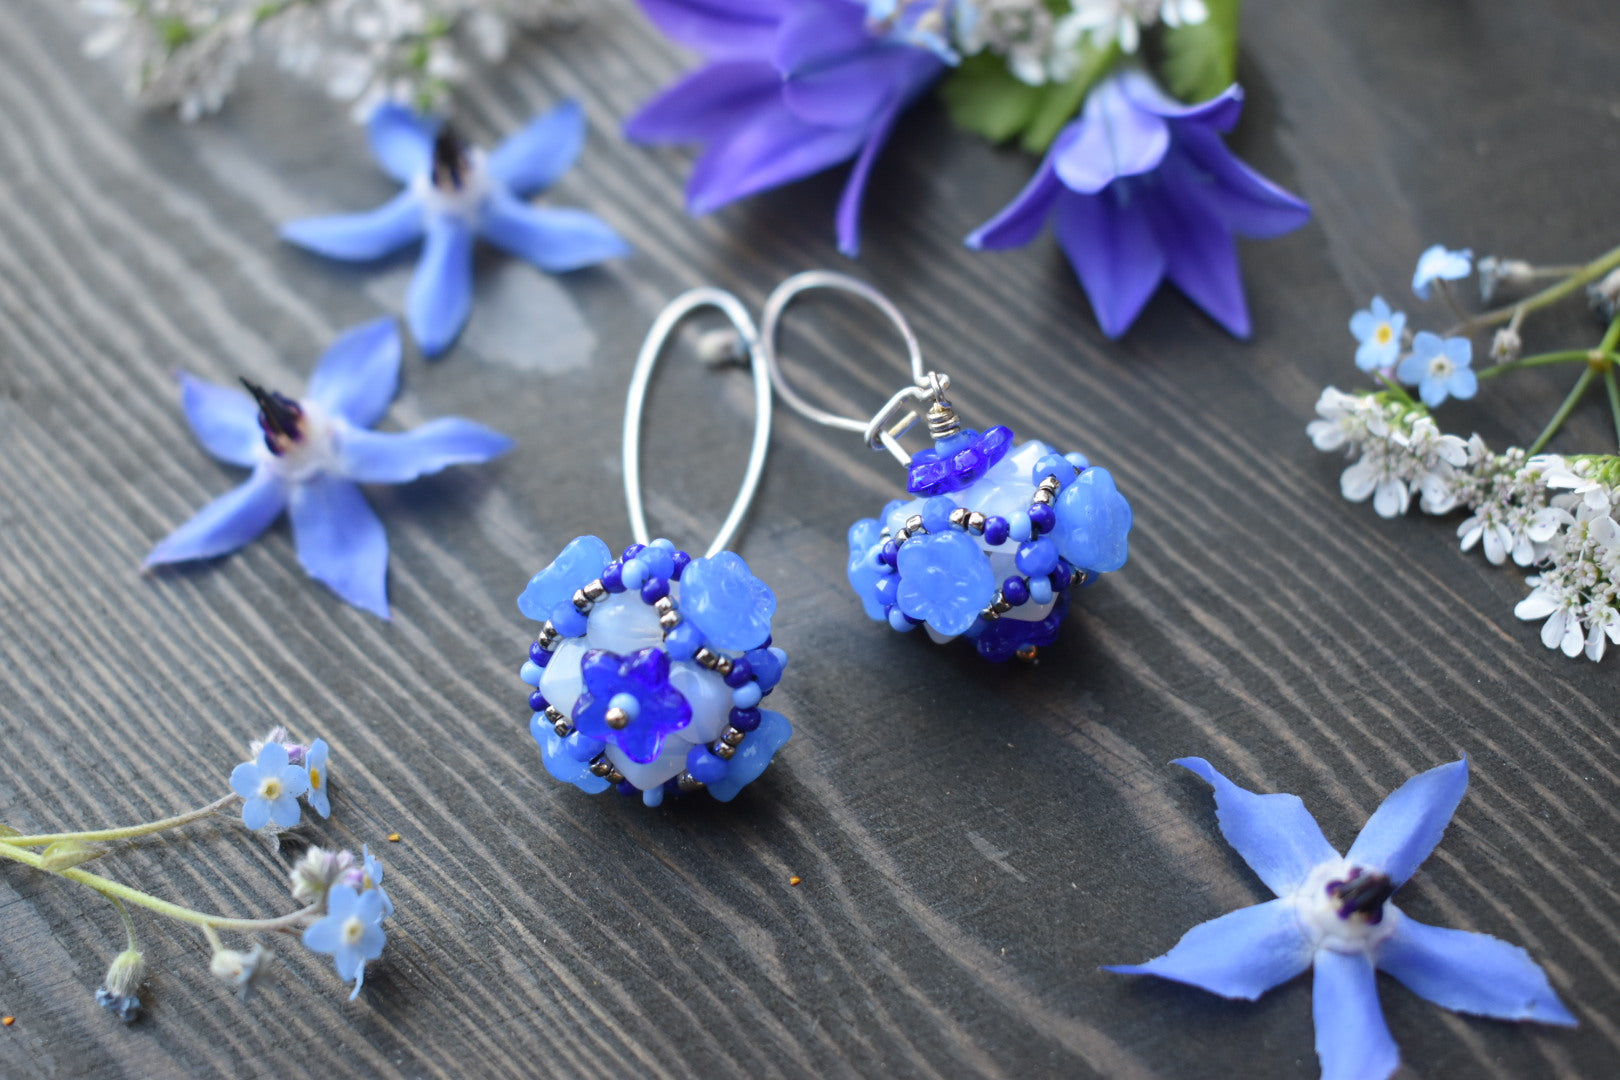 Light blue ball earrings with flowers on them lay on a wood background scattered with blue and white flowers.